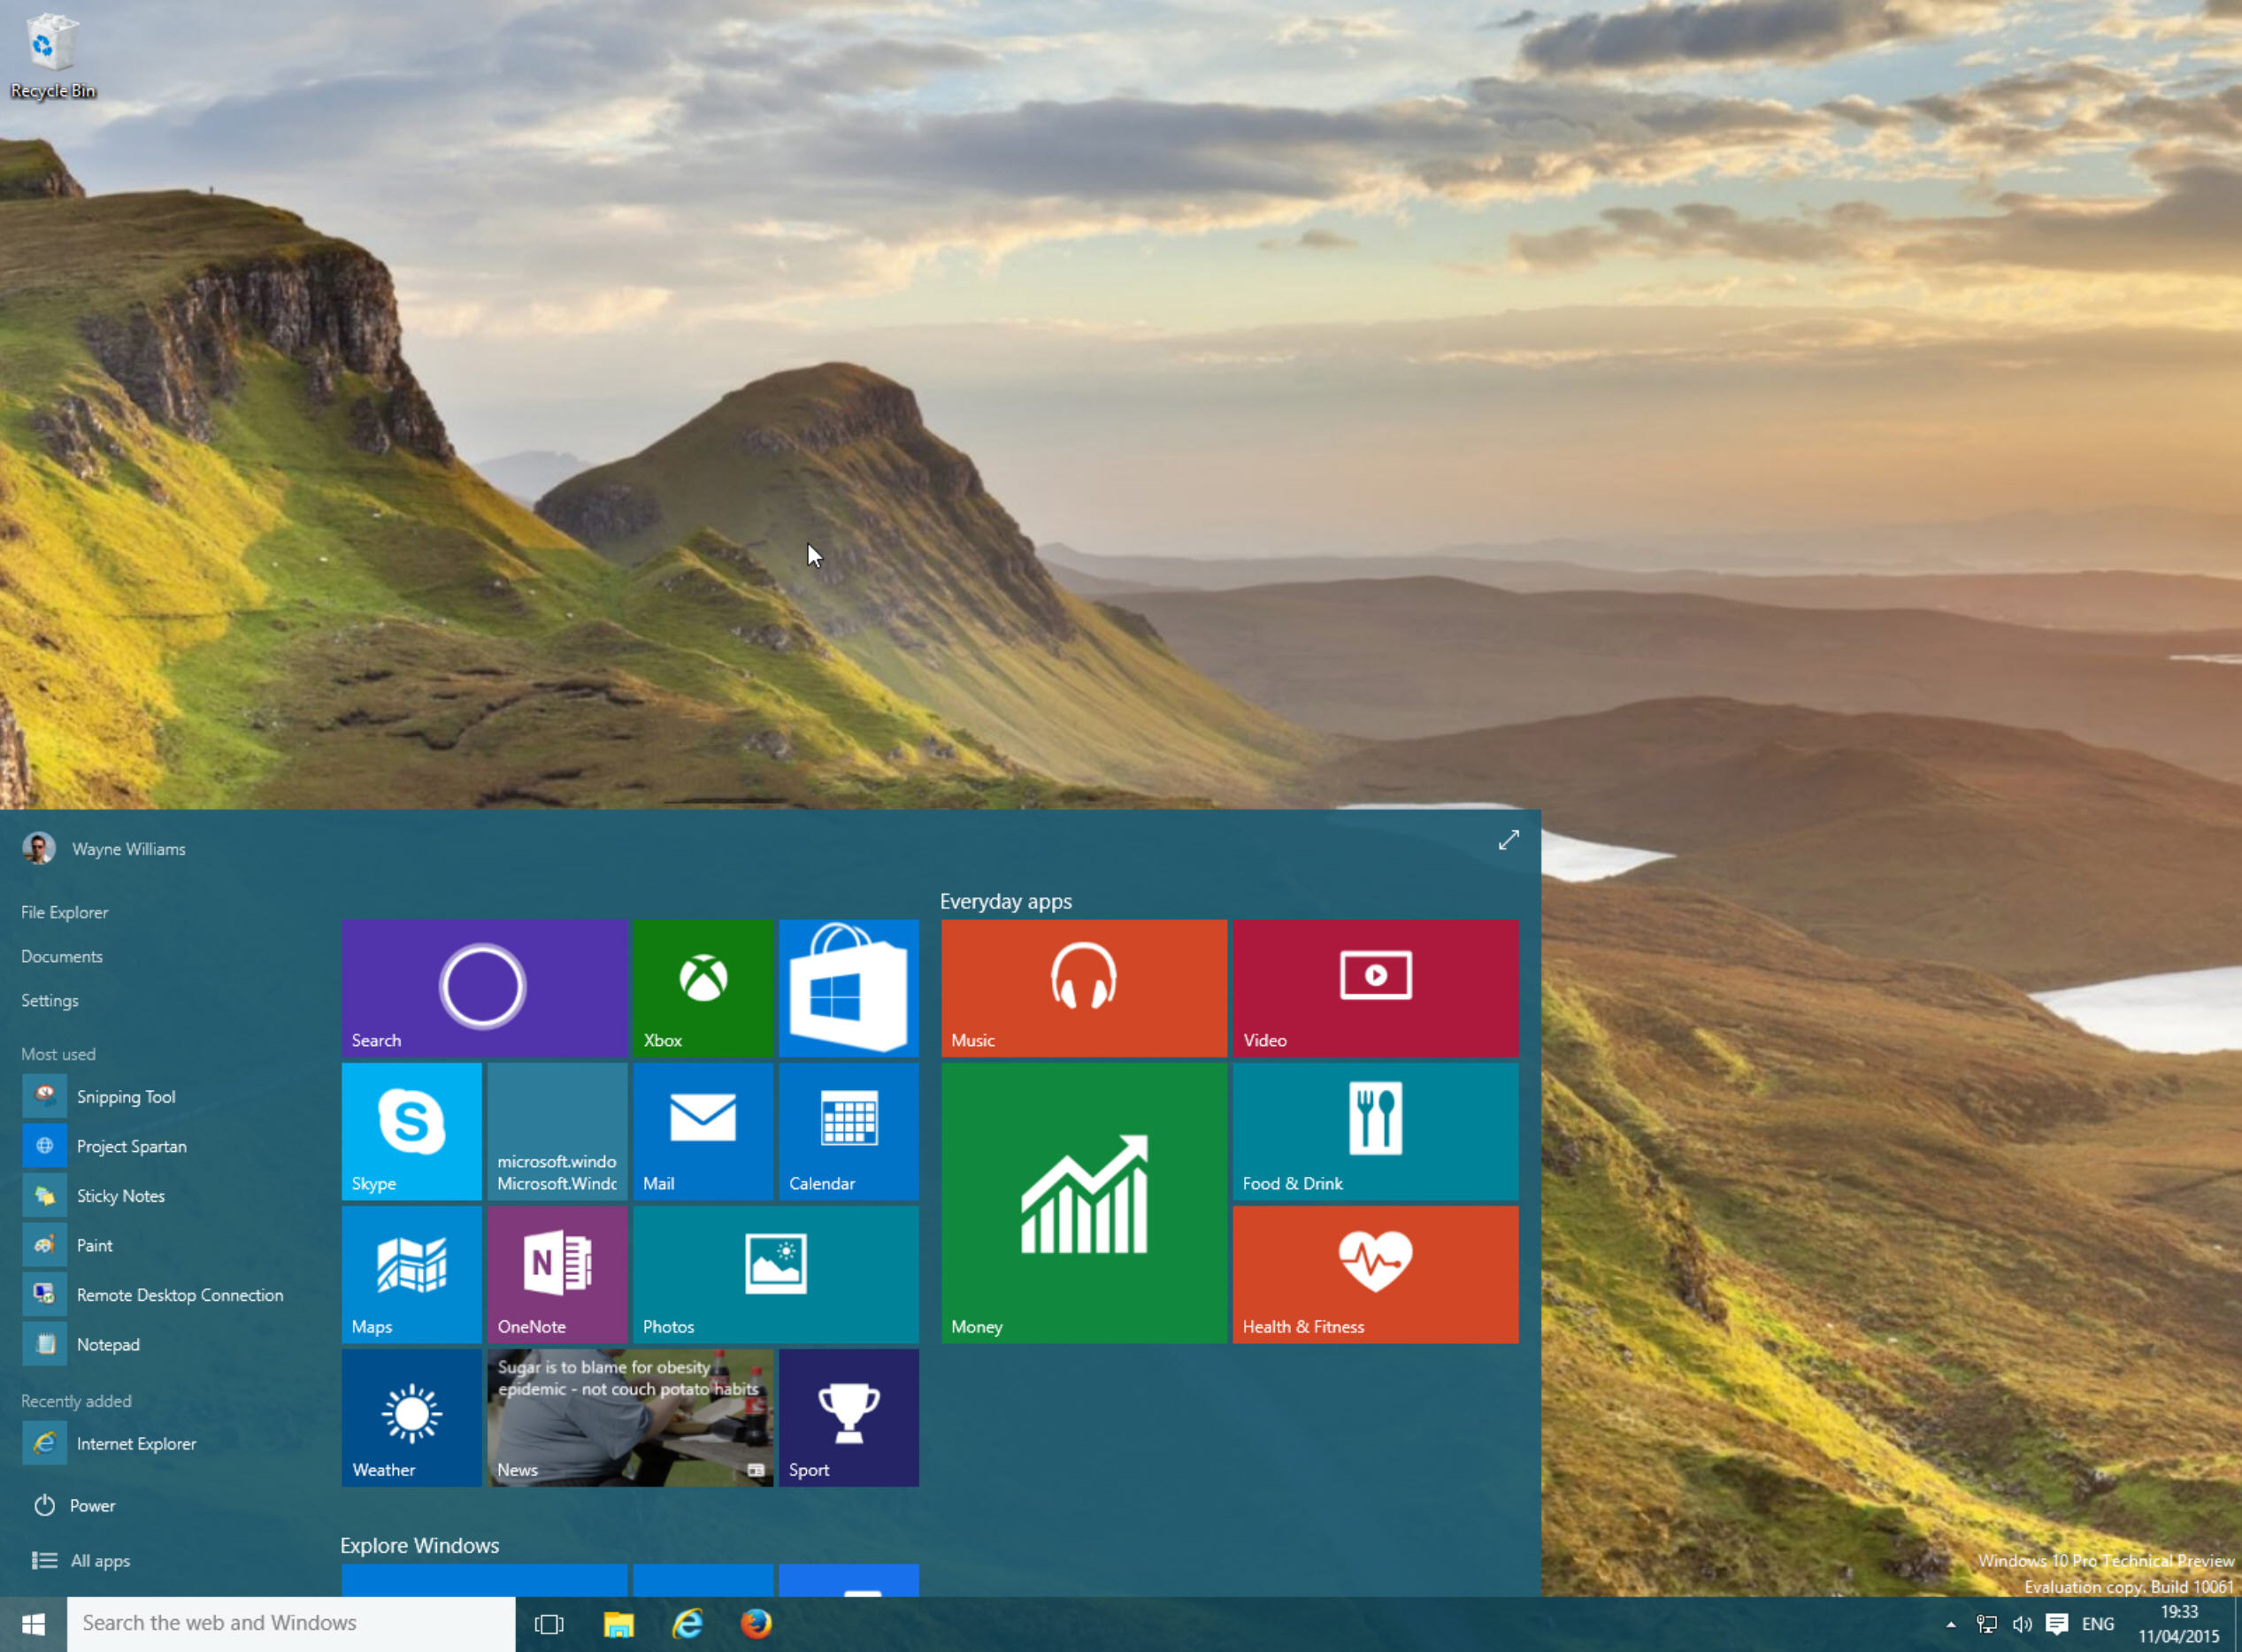 Windows 10 Build 10061 -- buggy, but a huge leap in the right direction